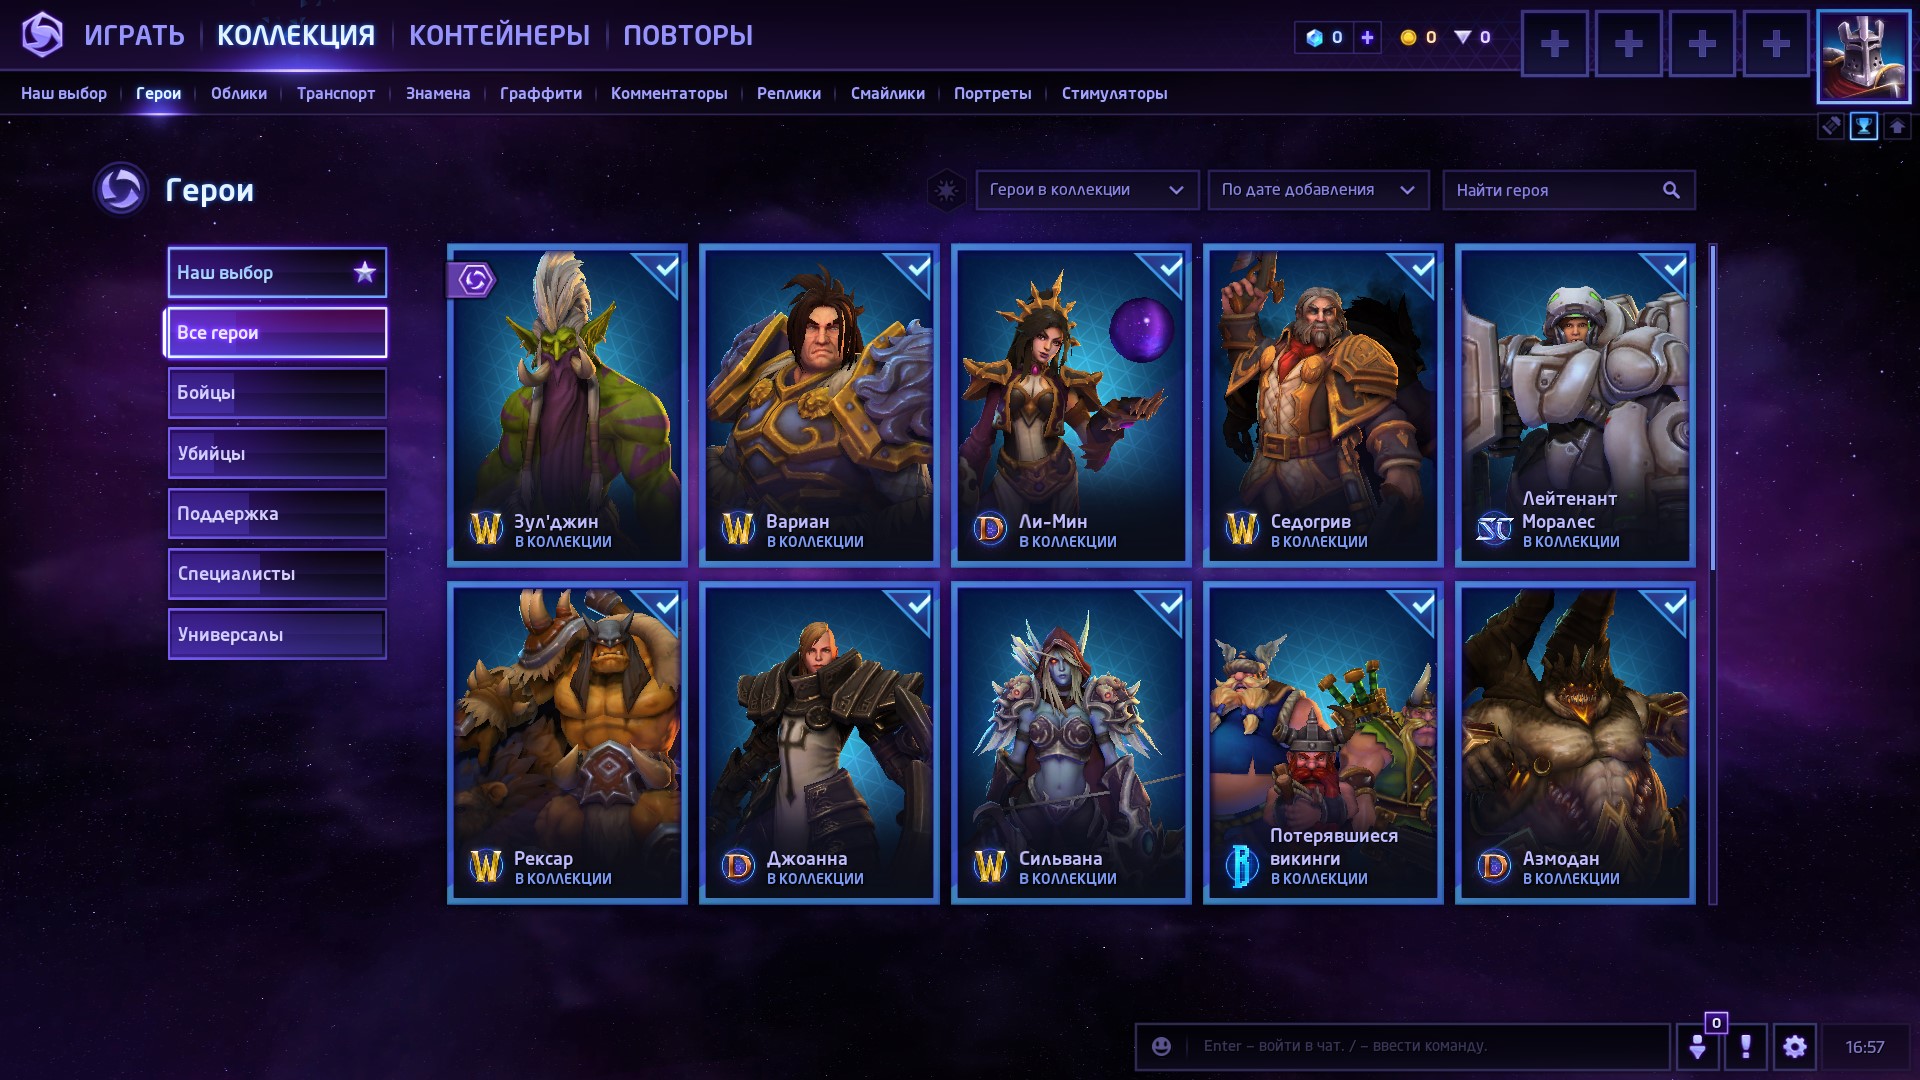 buy account heroes of the storm